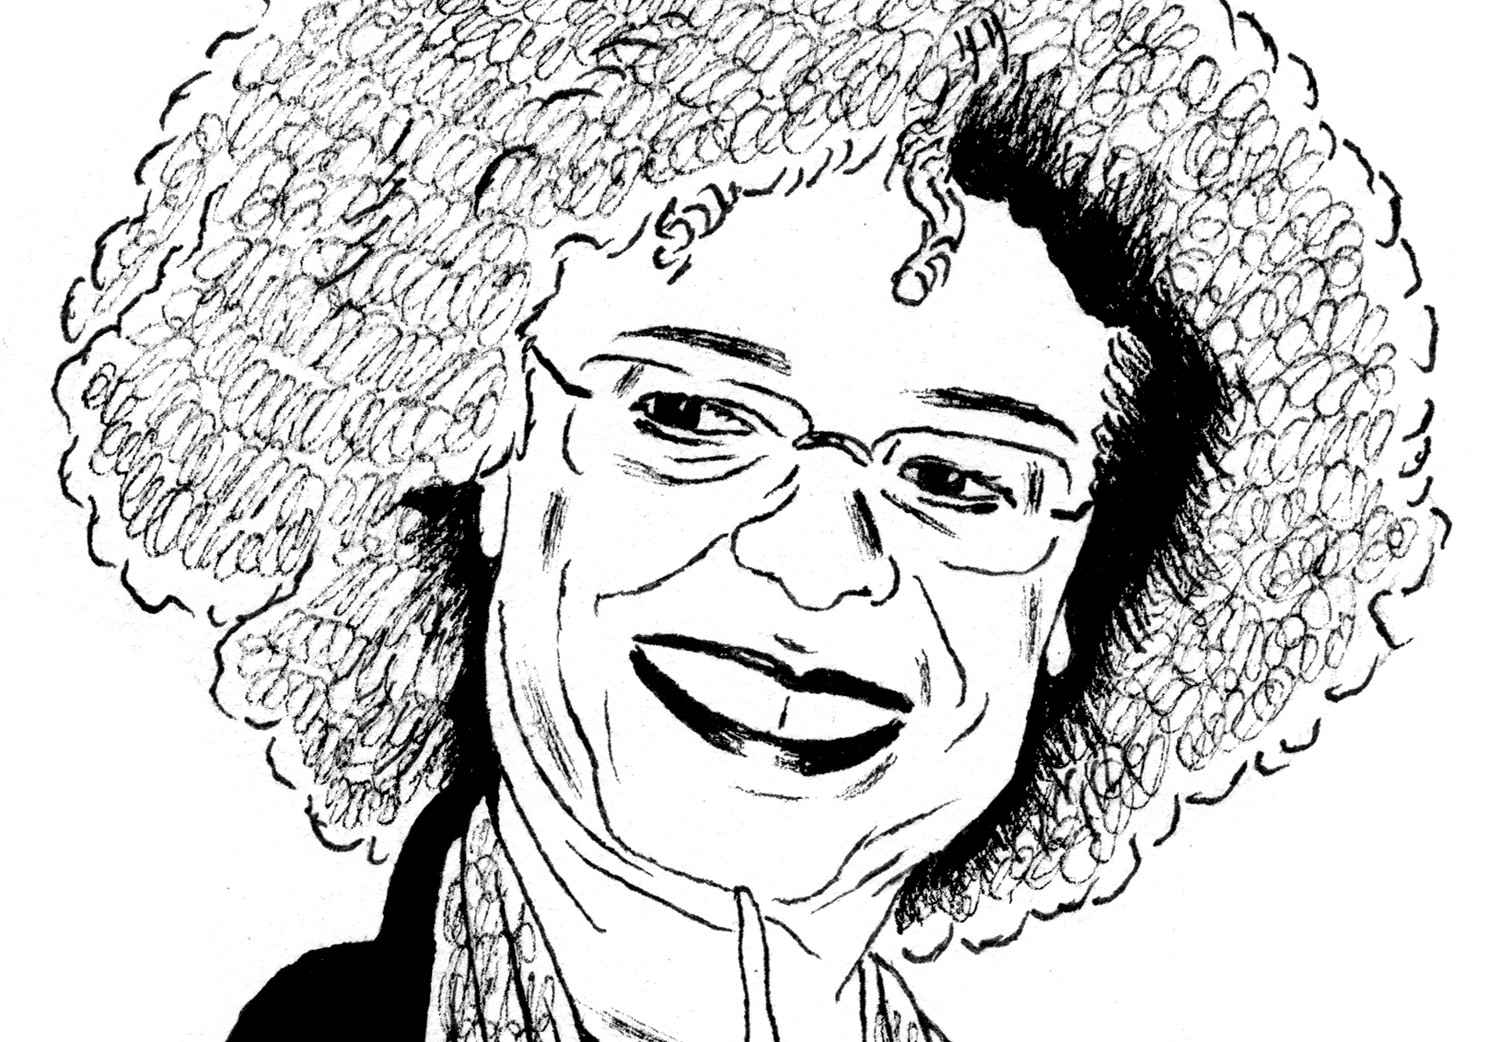 A Q&A With Angela Davis on Black Power, Feminism and the Prison-Industrial Complex